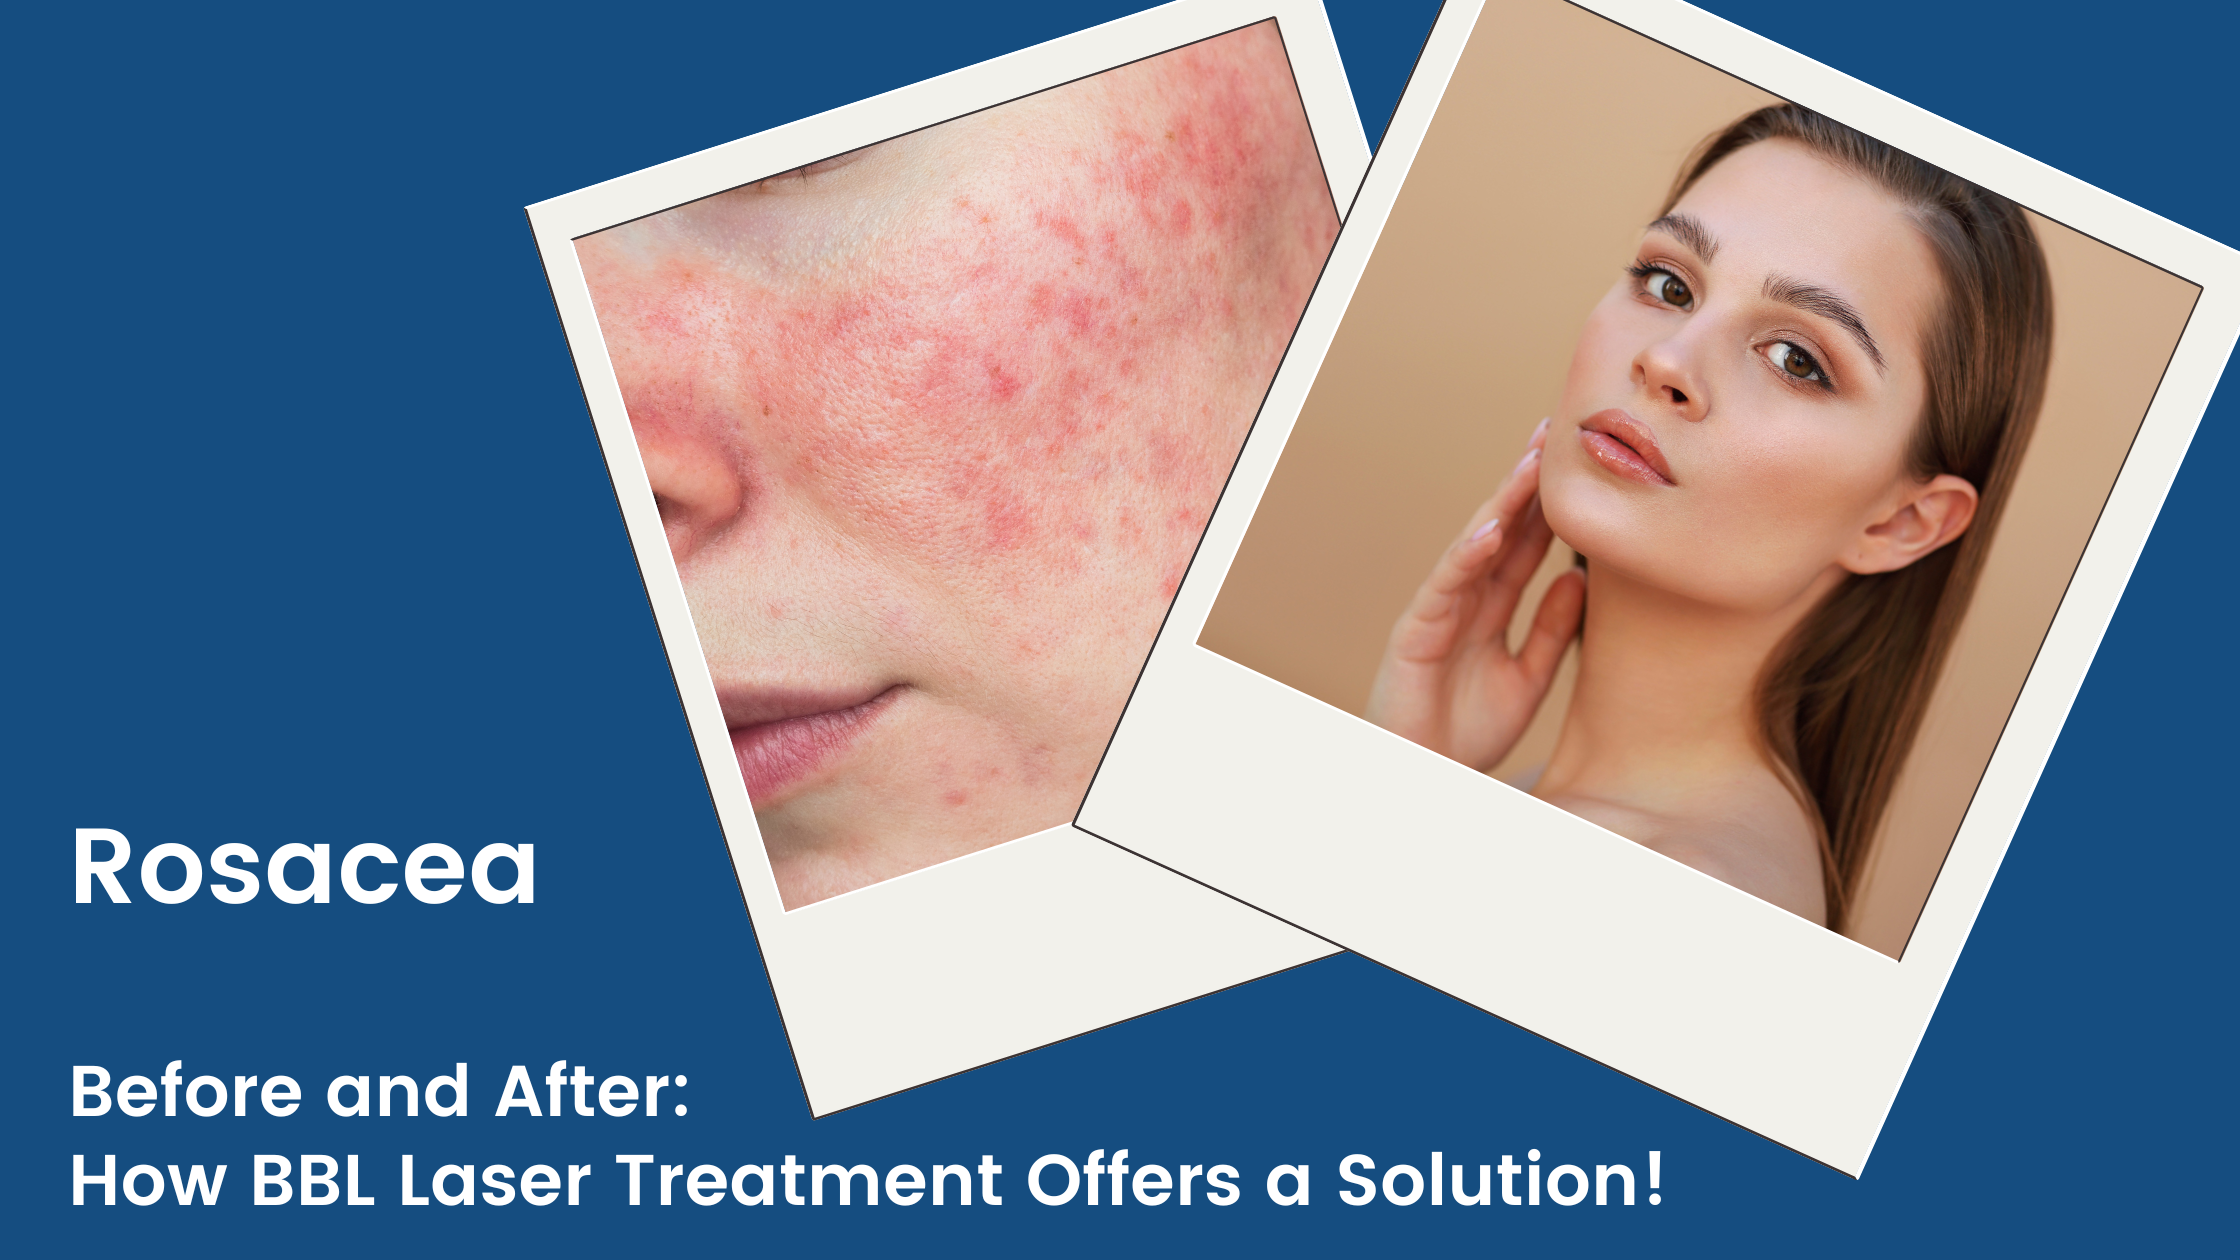 Rosacea Before and After: How BBL Laser Treatment Offers a Solution!